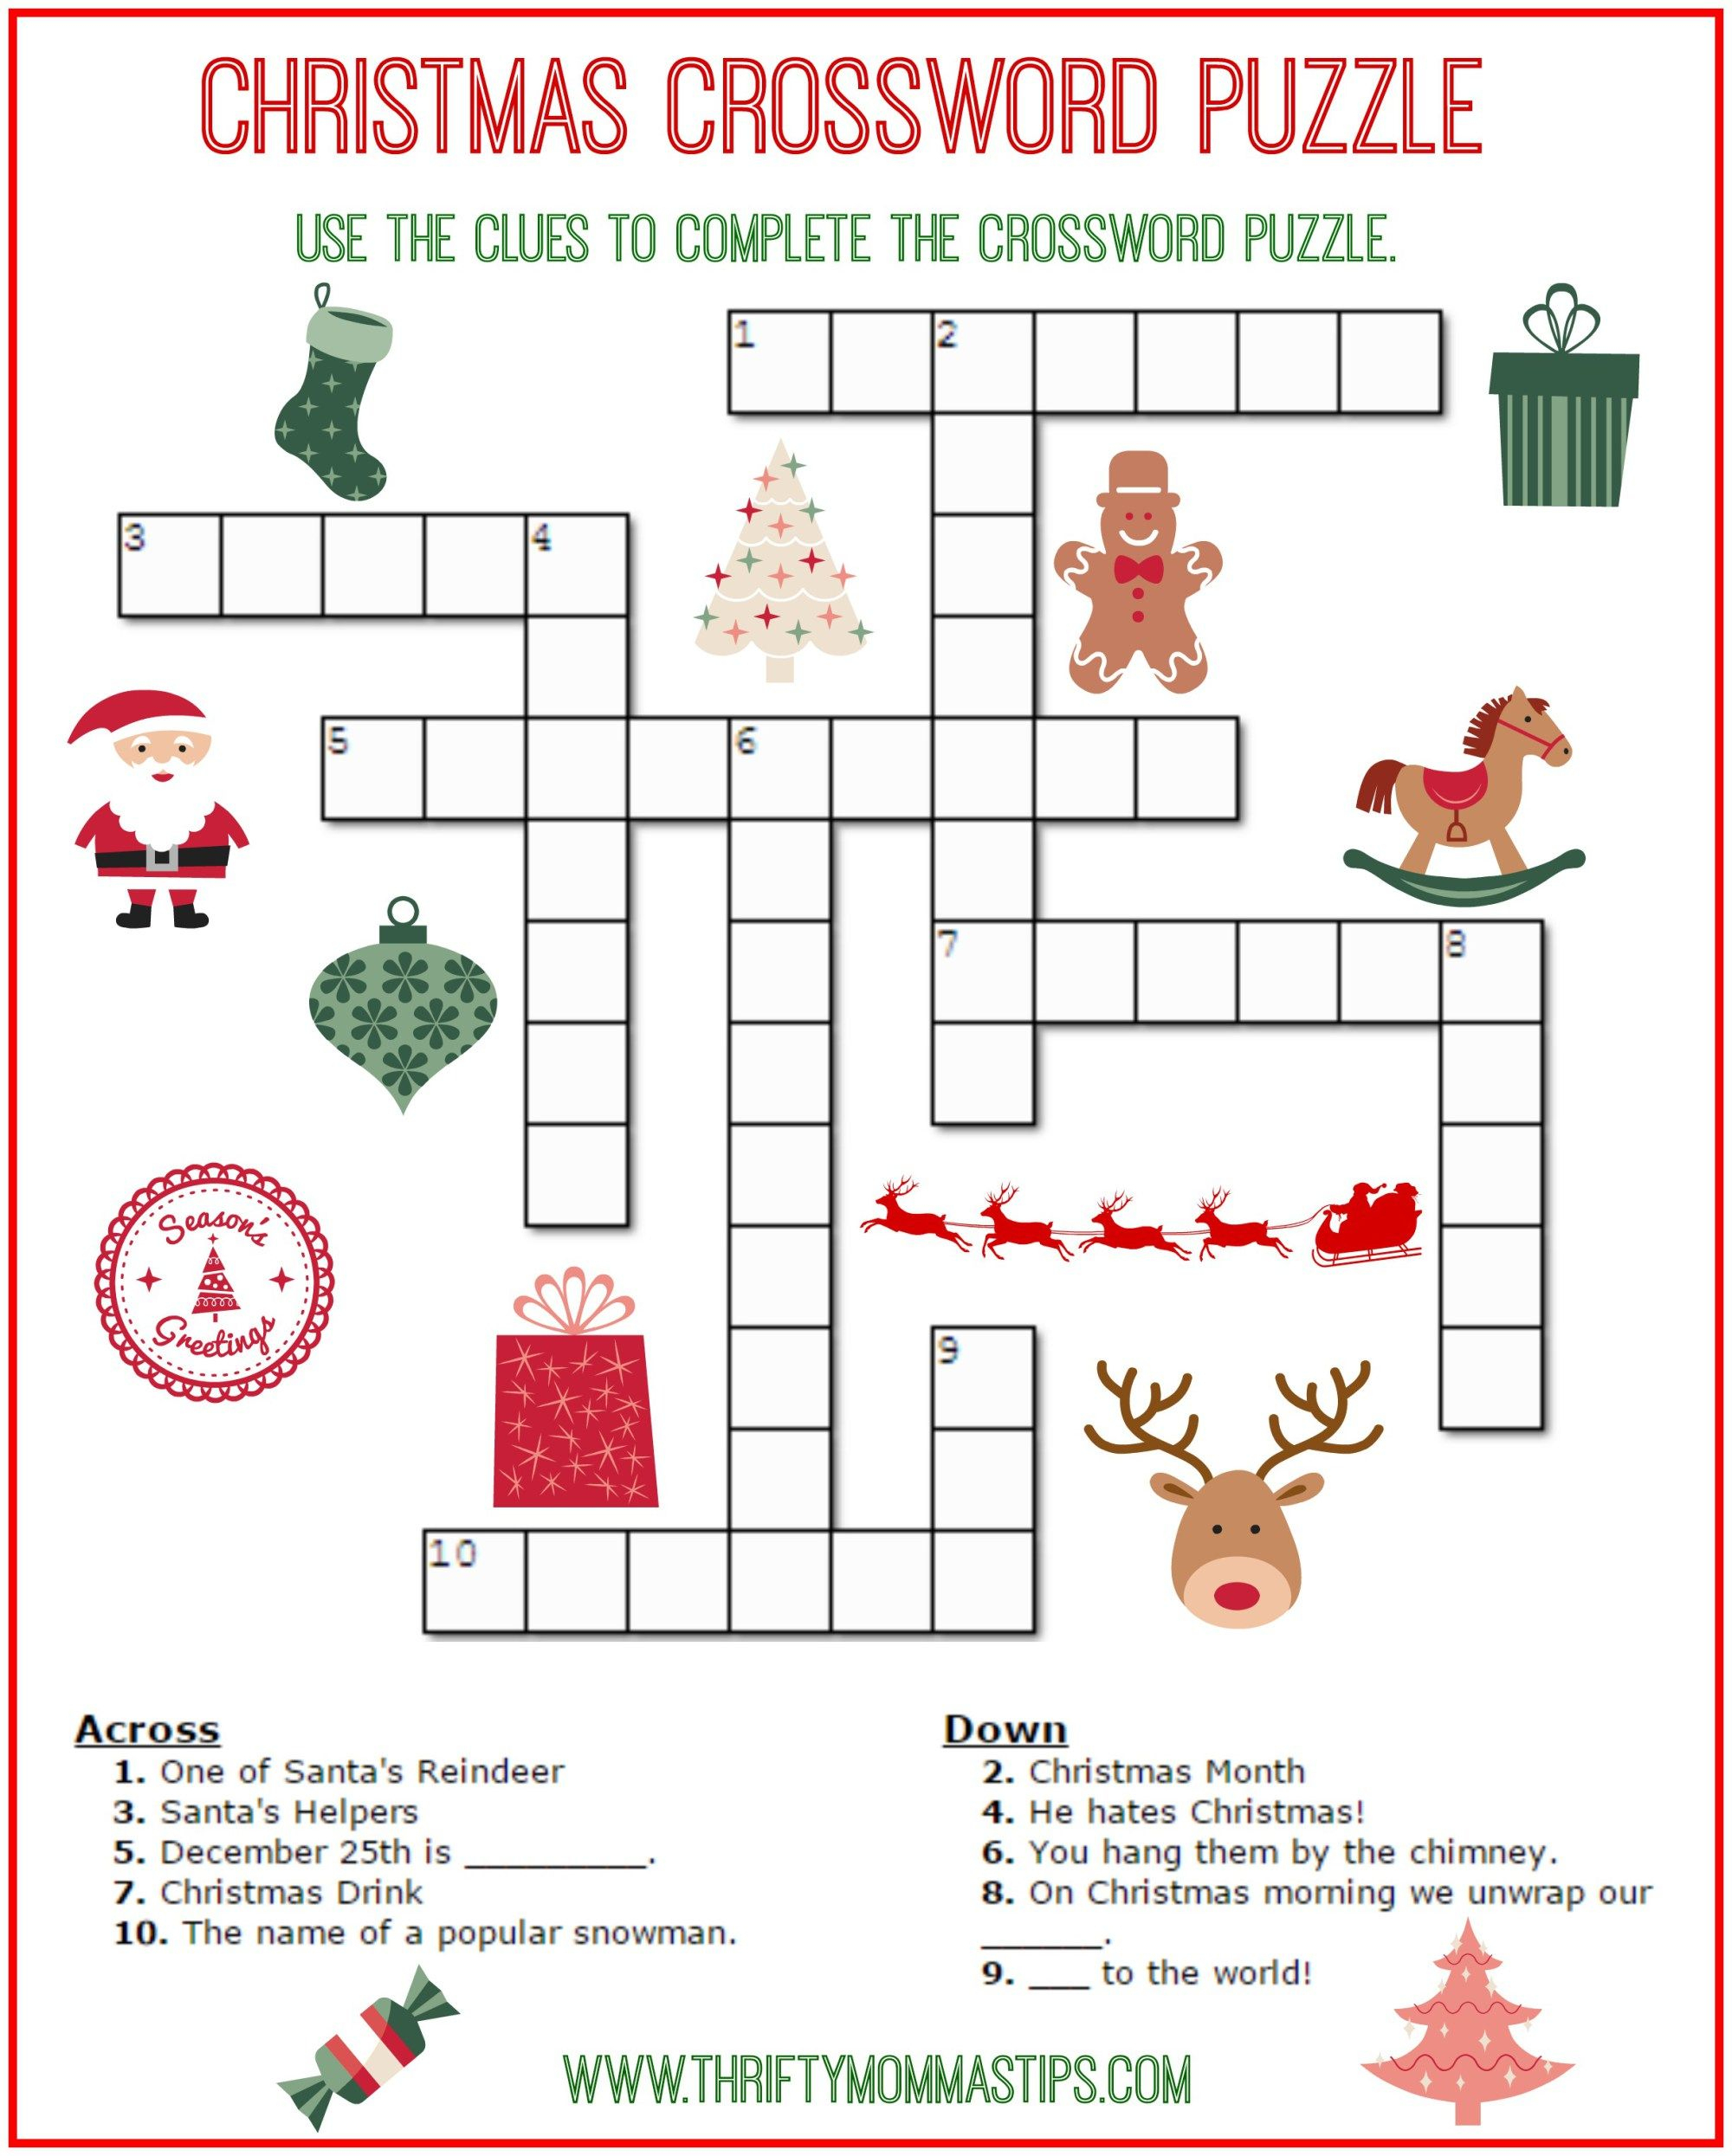 Christmas Crossword Puzzle Printable - Thrifty Momma&amp;#039;s Tips